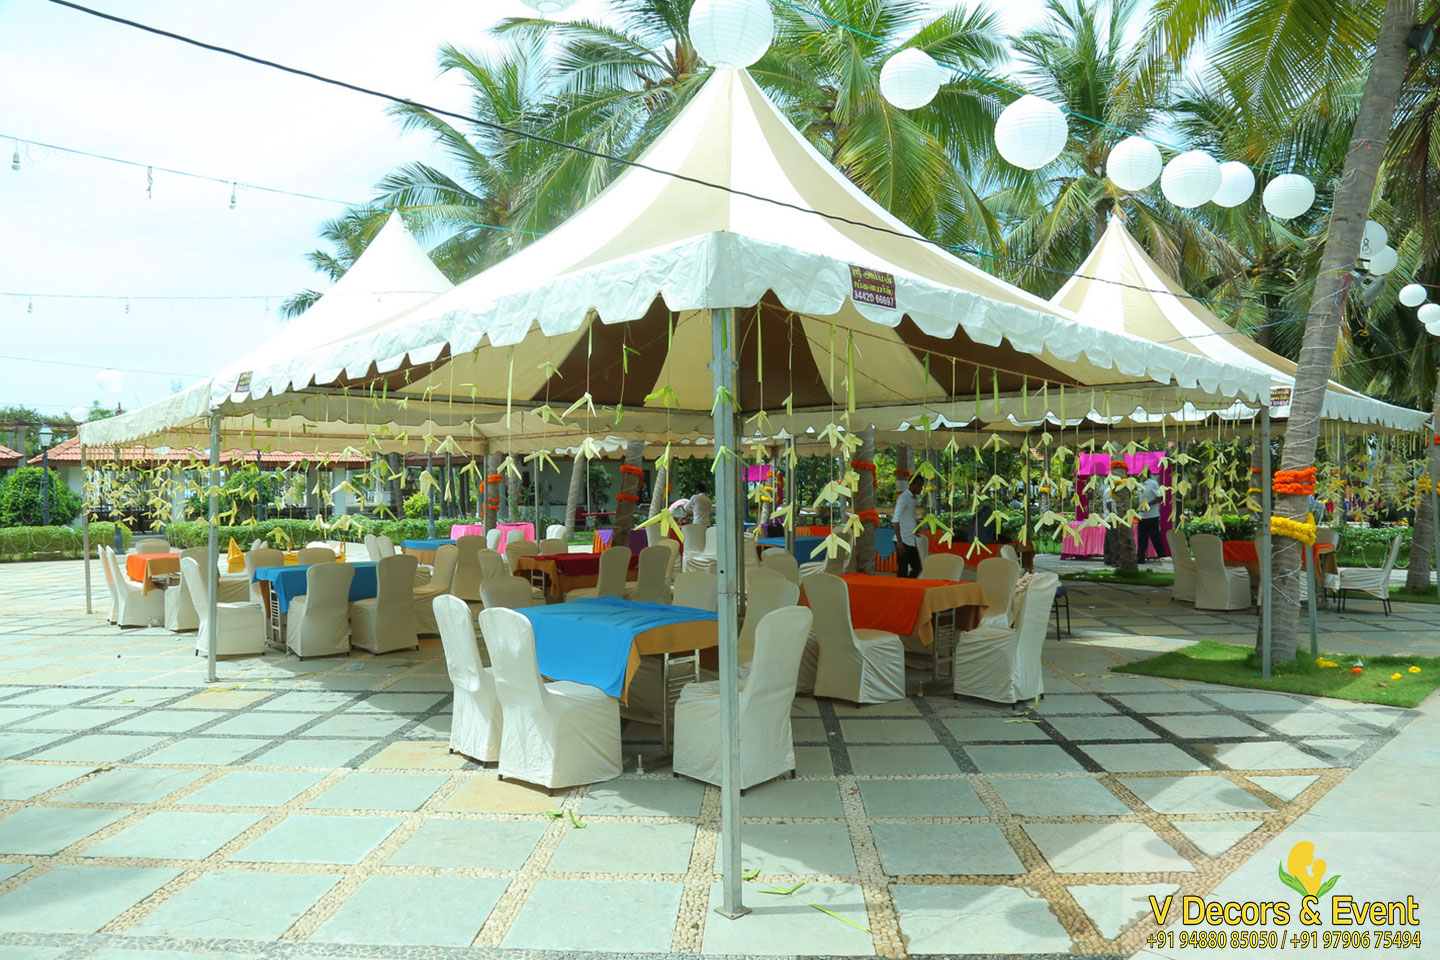 Puberty function Decorations Organize at RKN Beach Resort